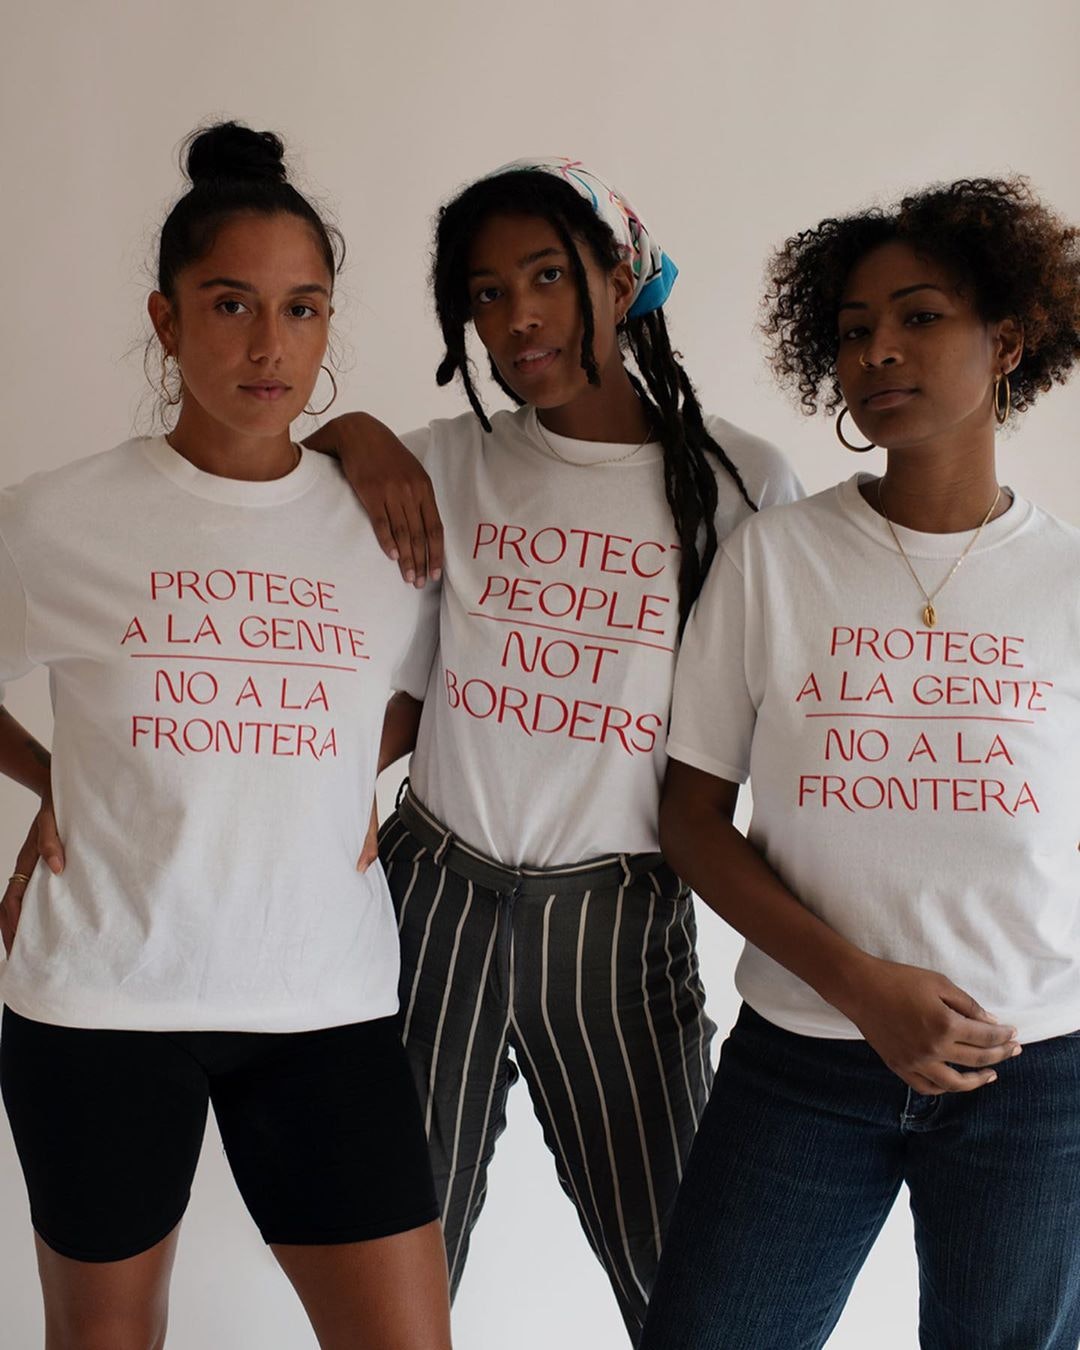 three people starting in tee shirts that say Protege a la gente/No a la frontera